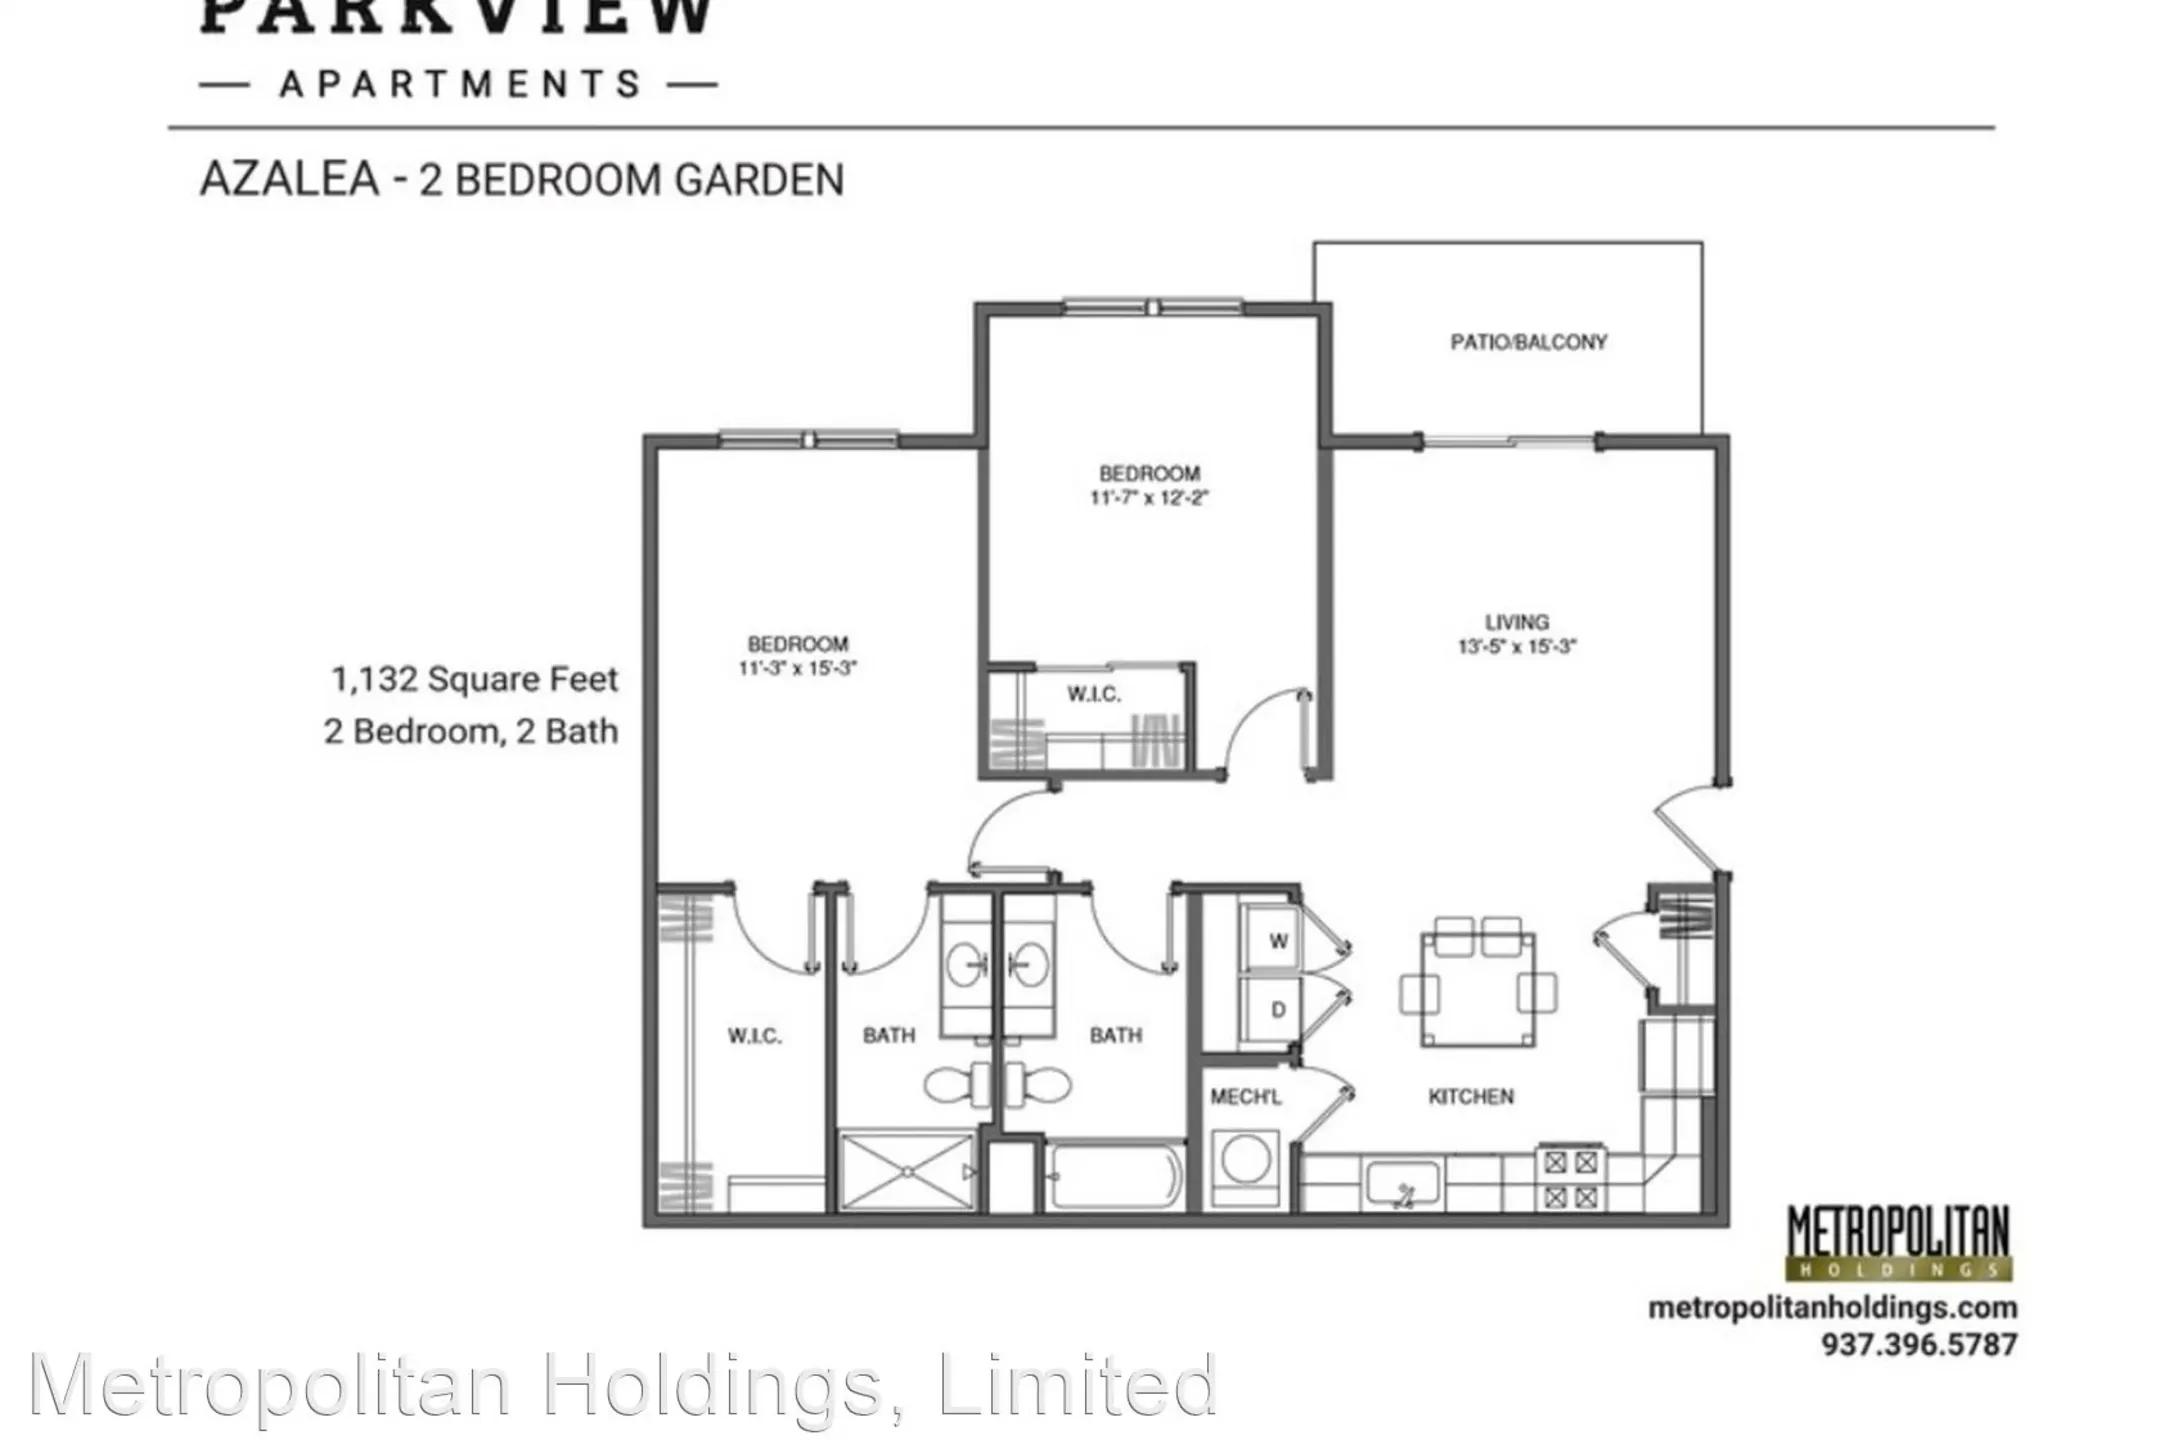 Parkview Apartments - Huber Heights, OH